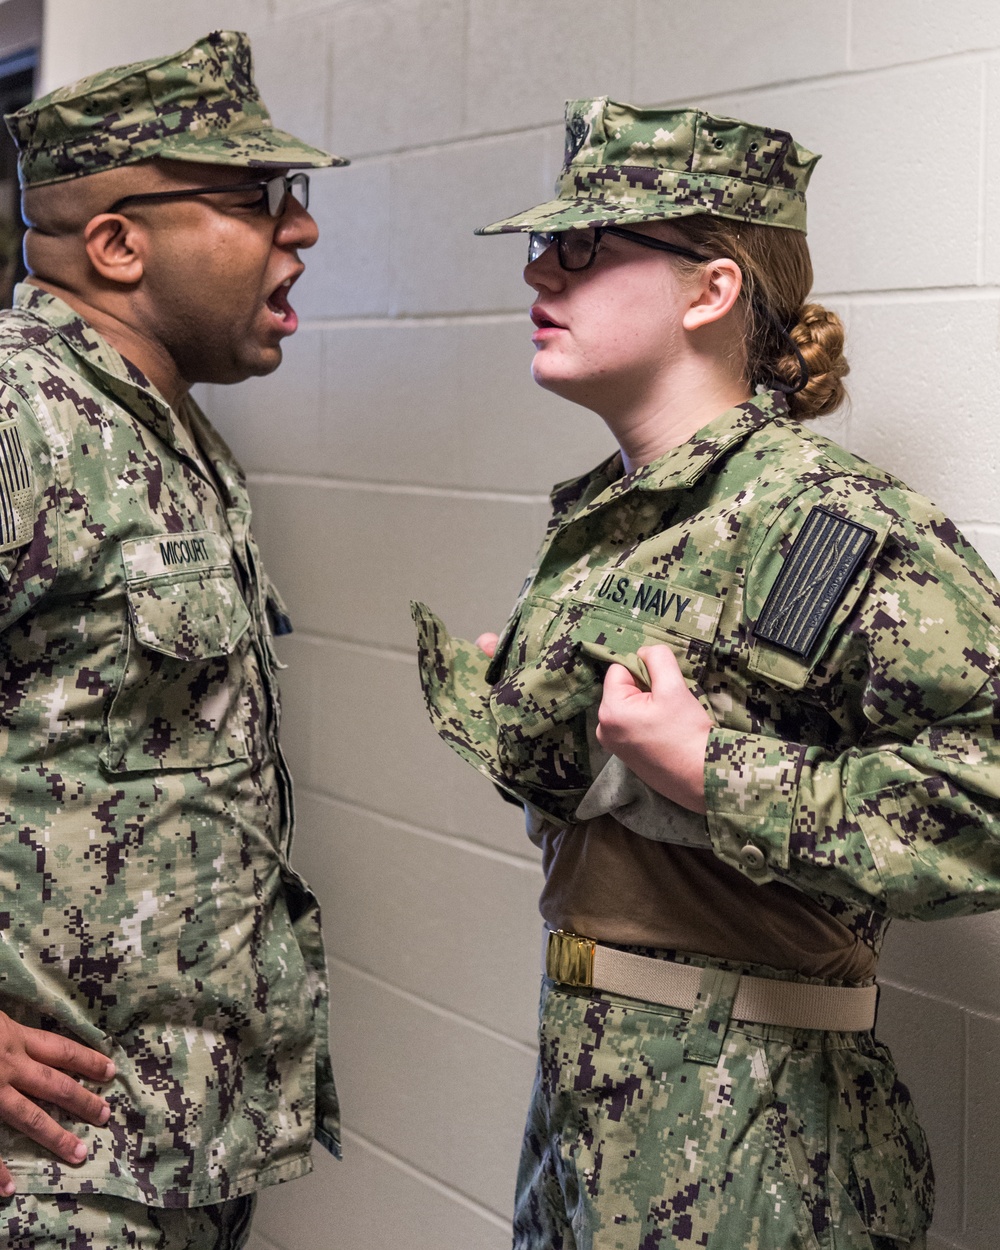 191115-N-TE695-0004 NEWPORT, R.I. (Oct. 31, 2019) -- Navy Officer Candidate School conducts a uniform inspection